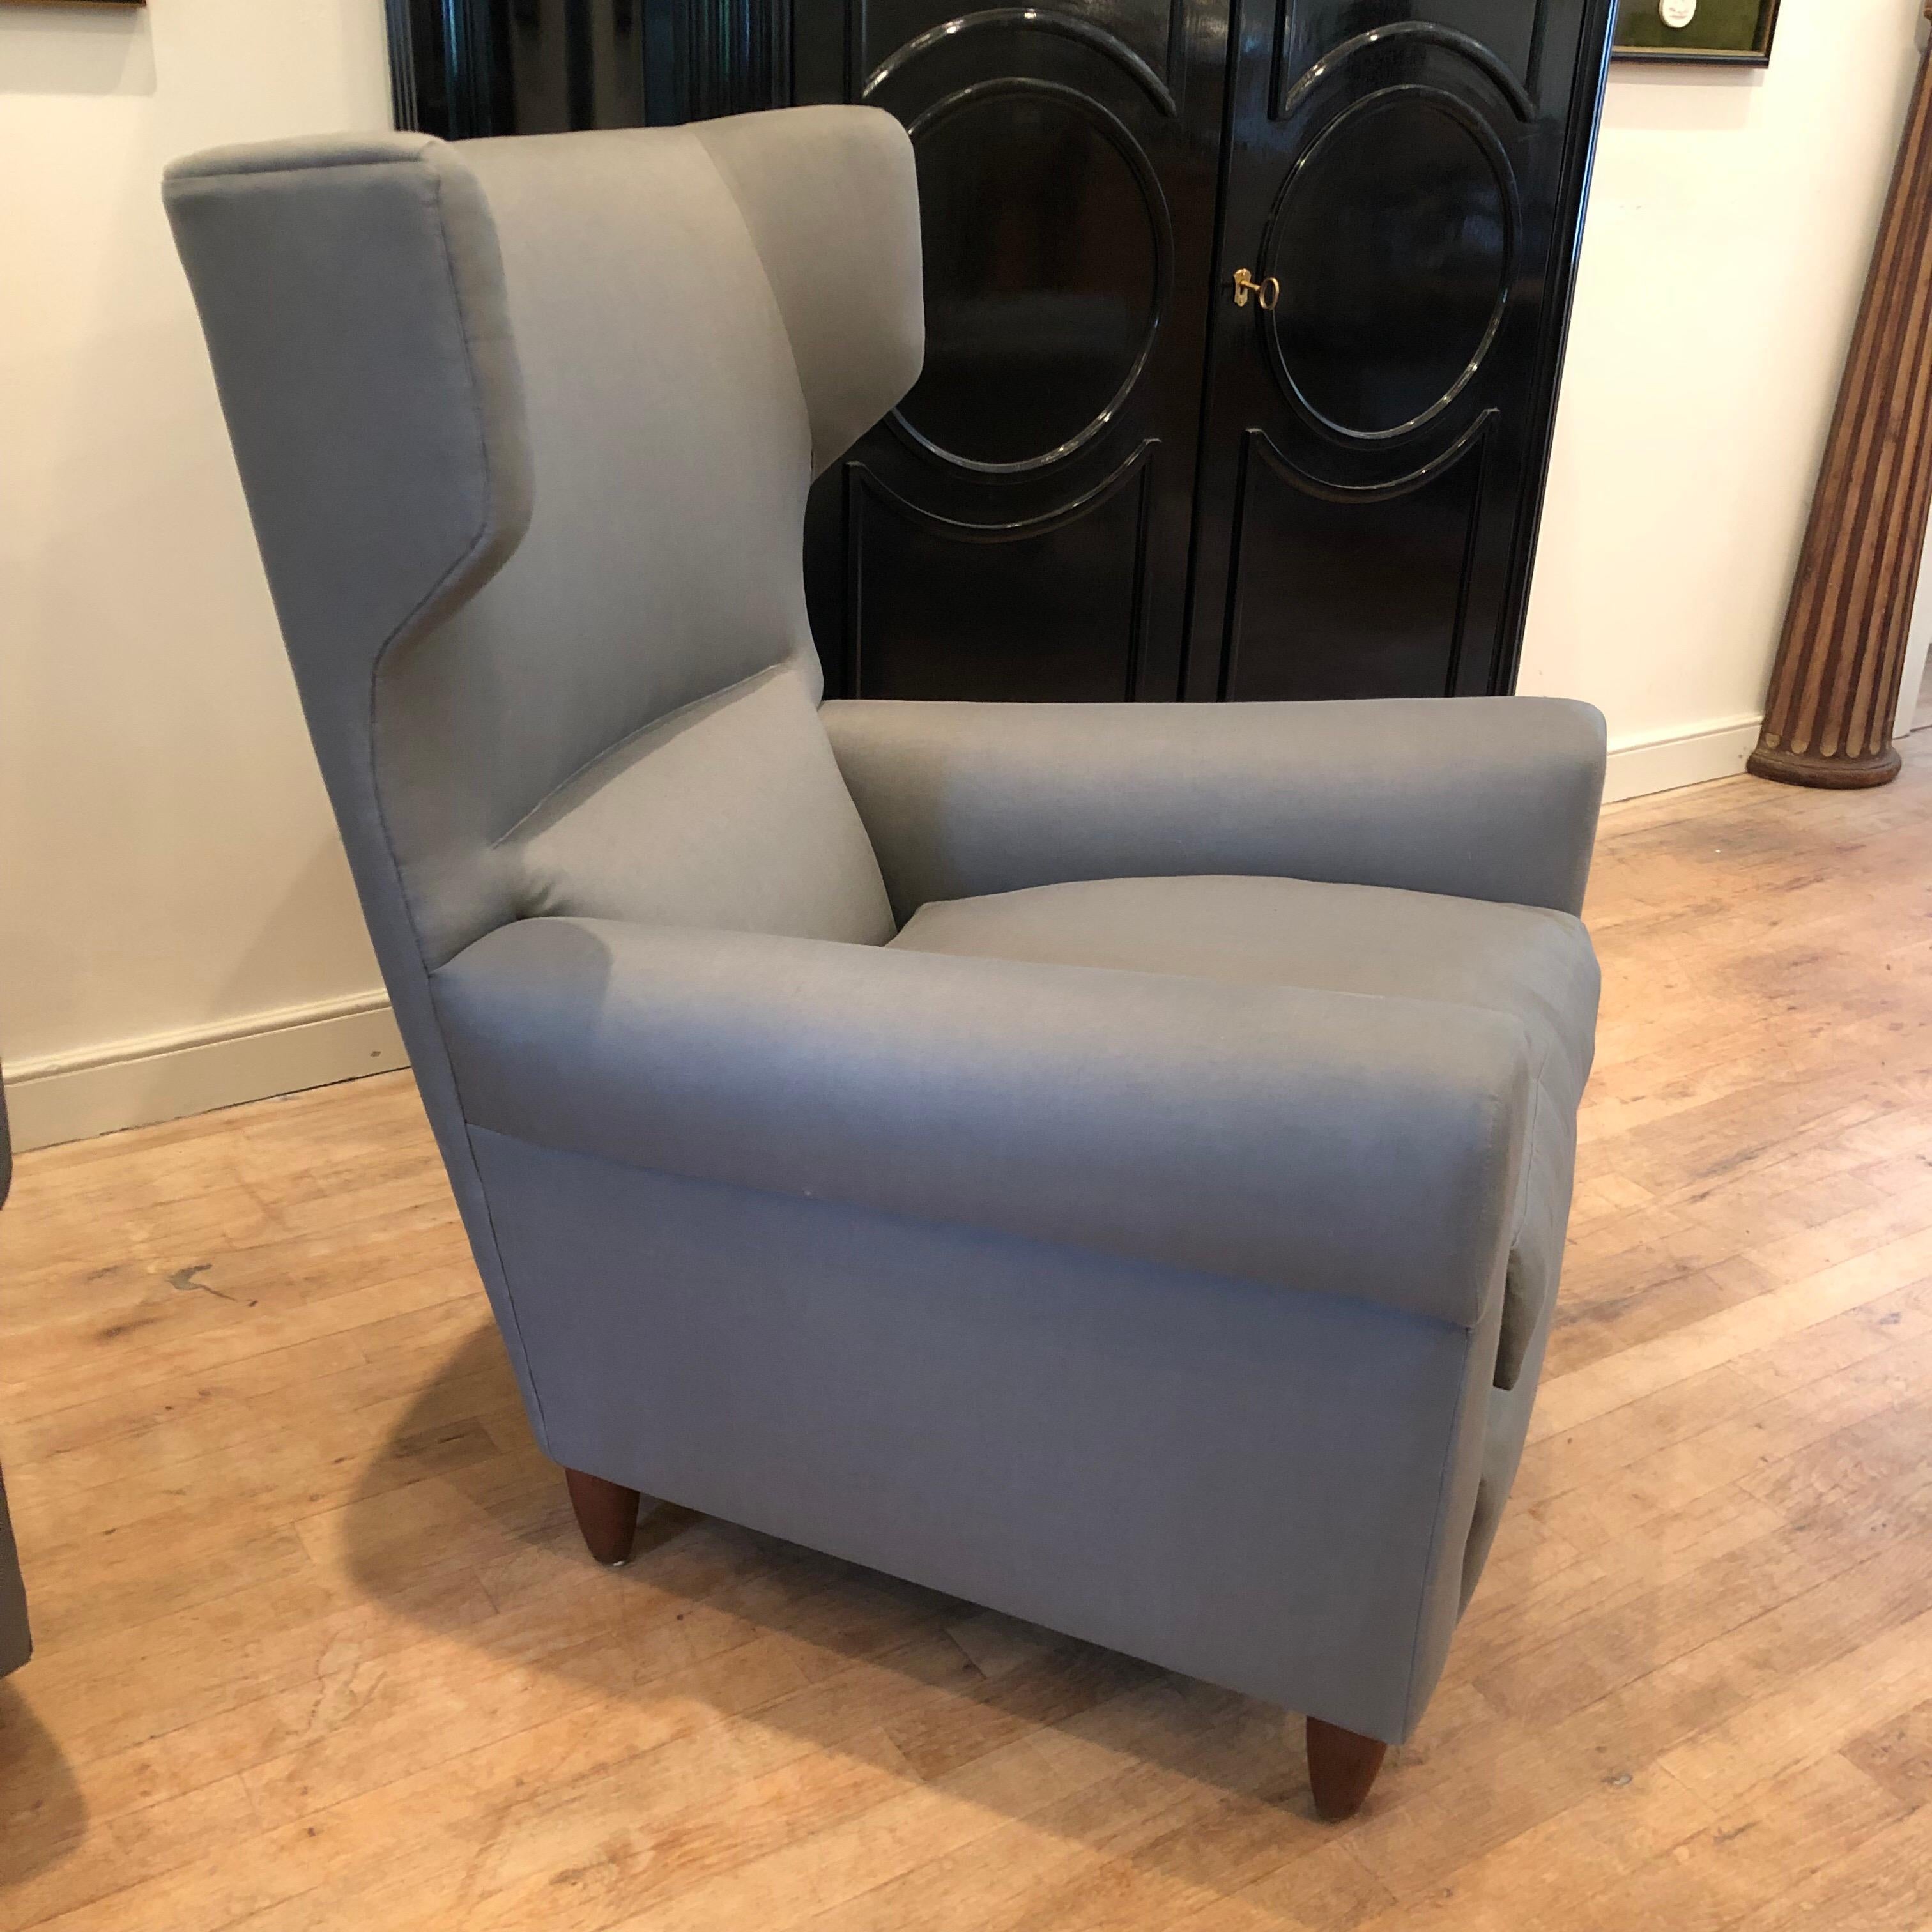 Pair of Gio Ponti Style Armchairs In Good Condition For Sale In East Hampton, NY